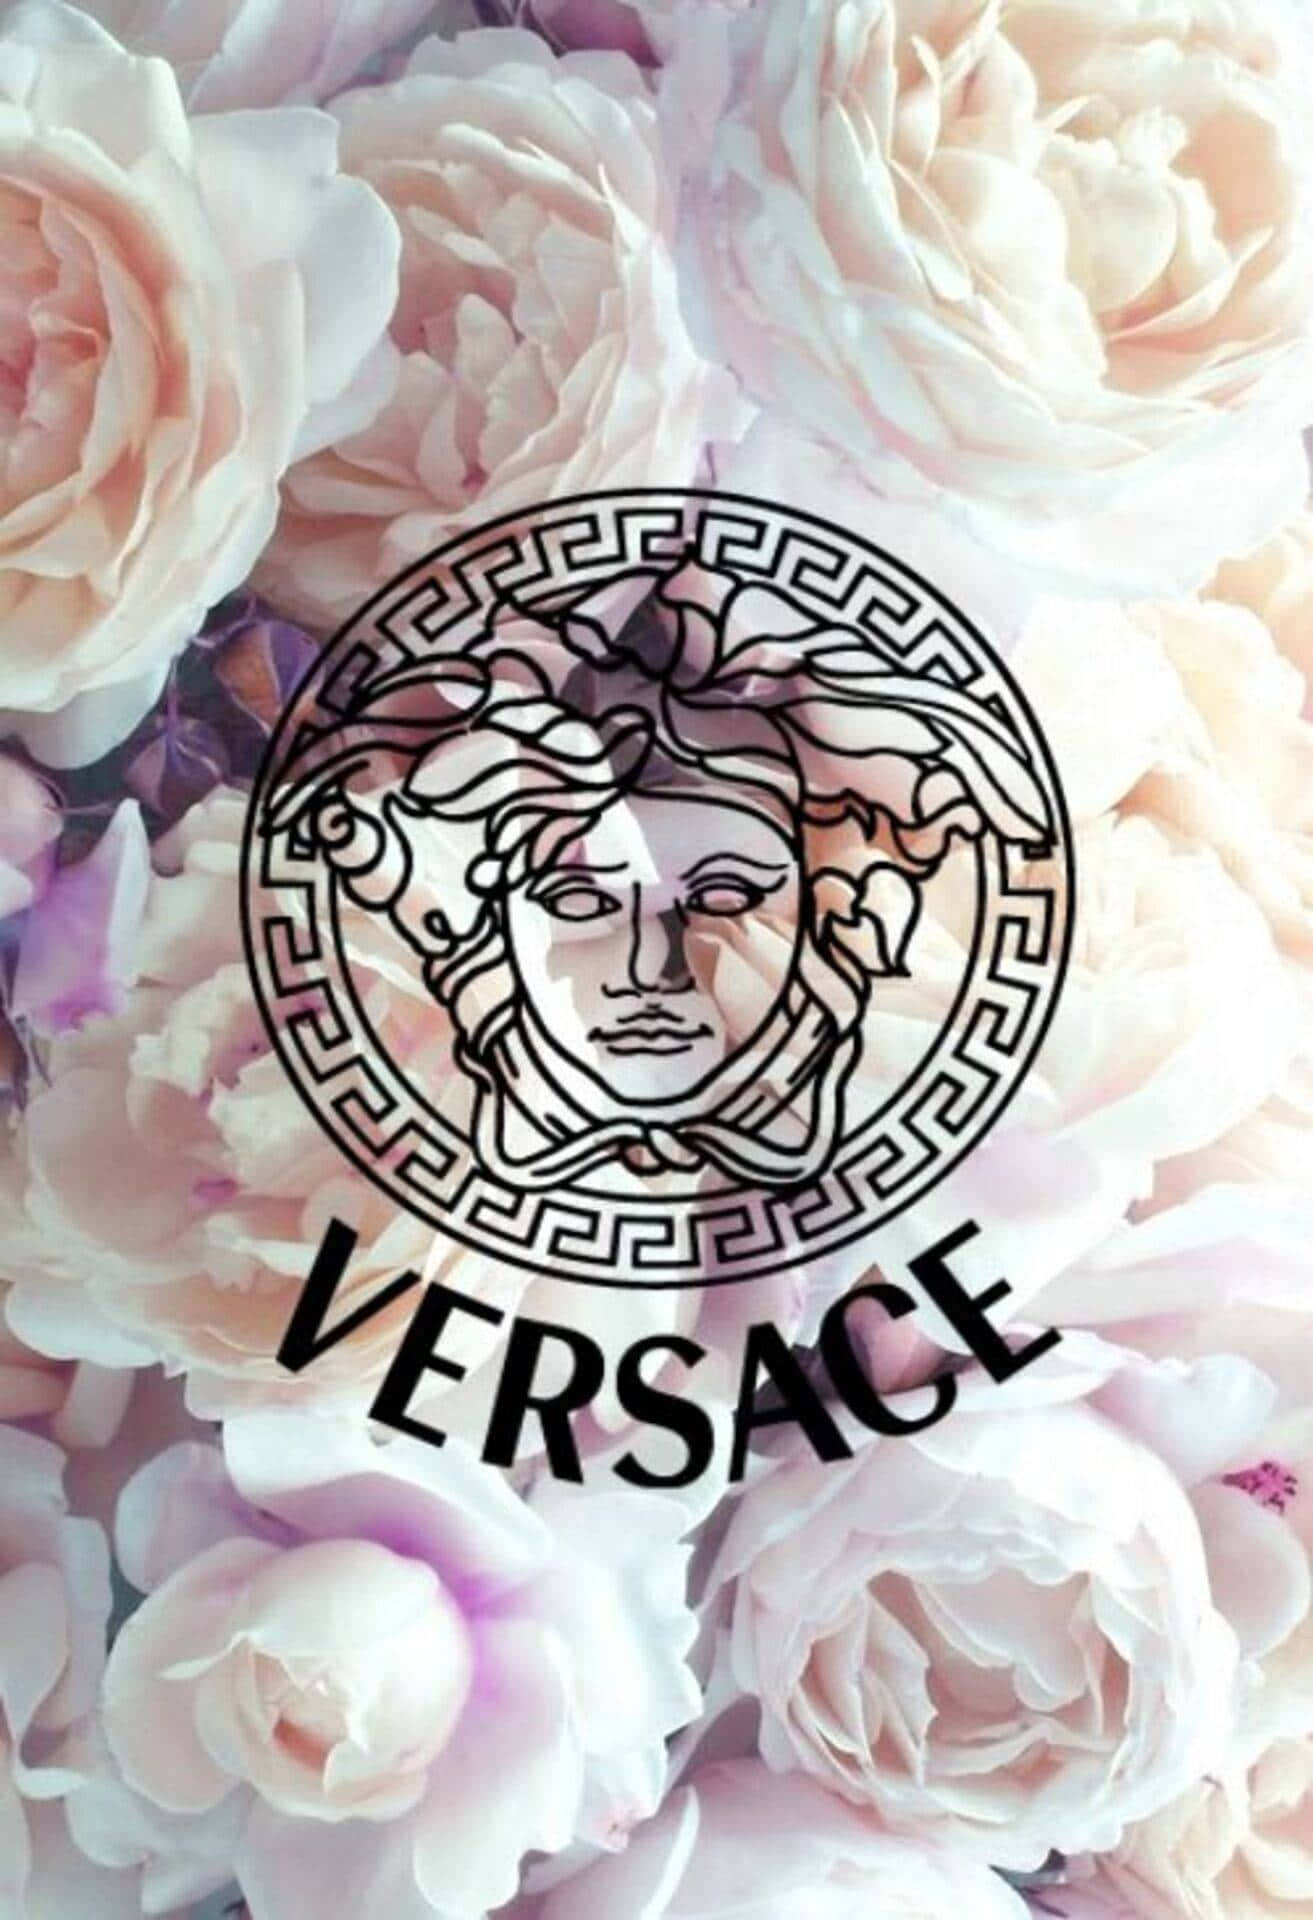 Versace Logo With Flowers In The Background